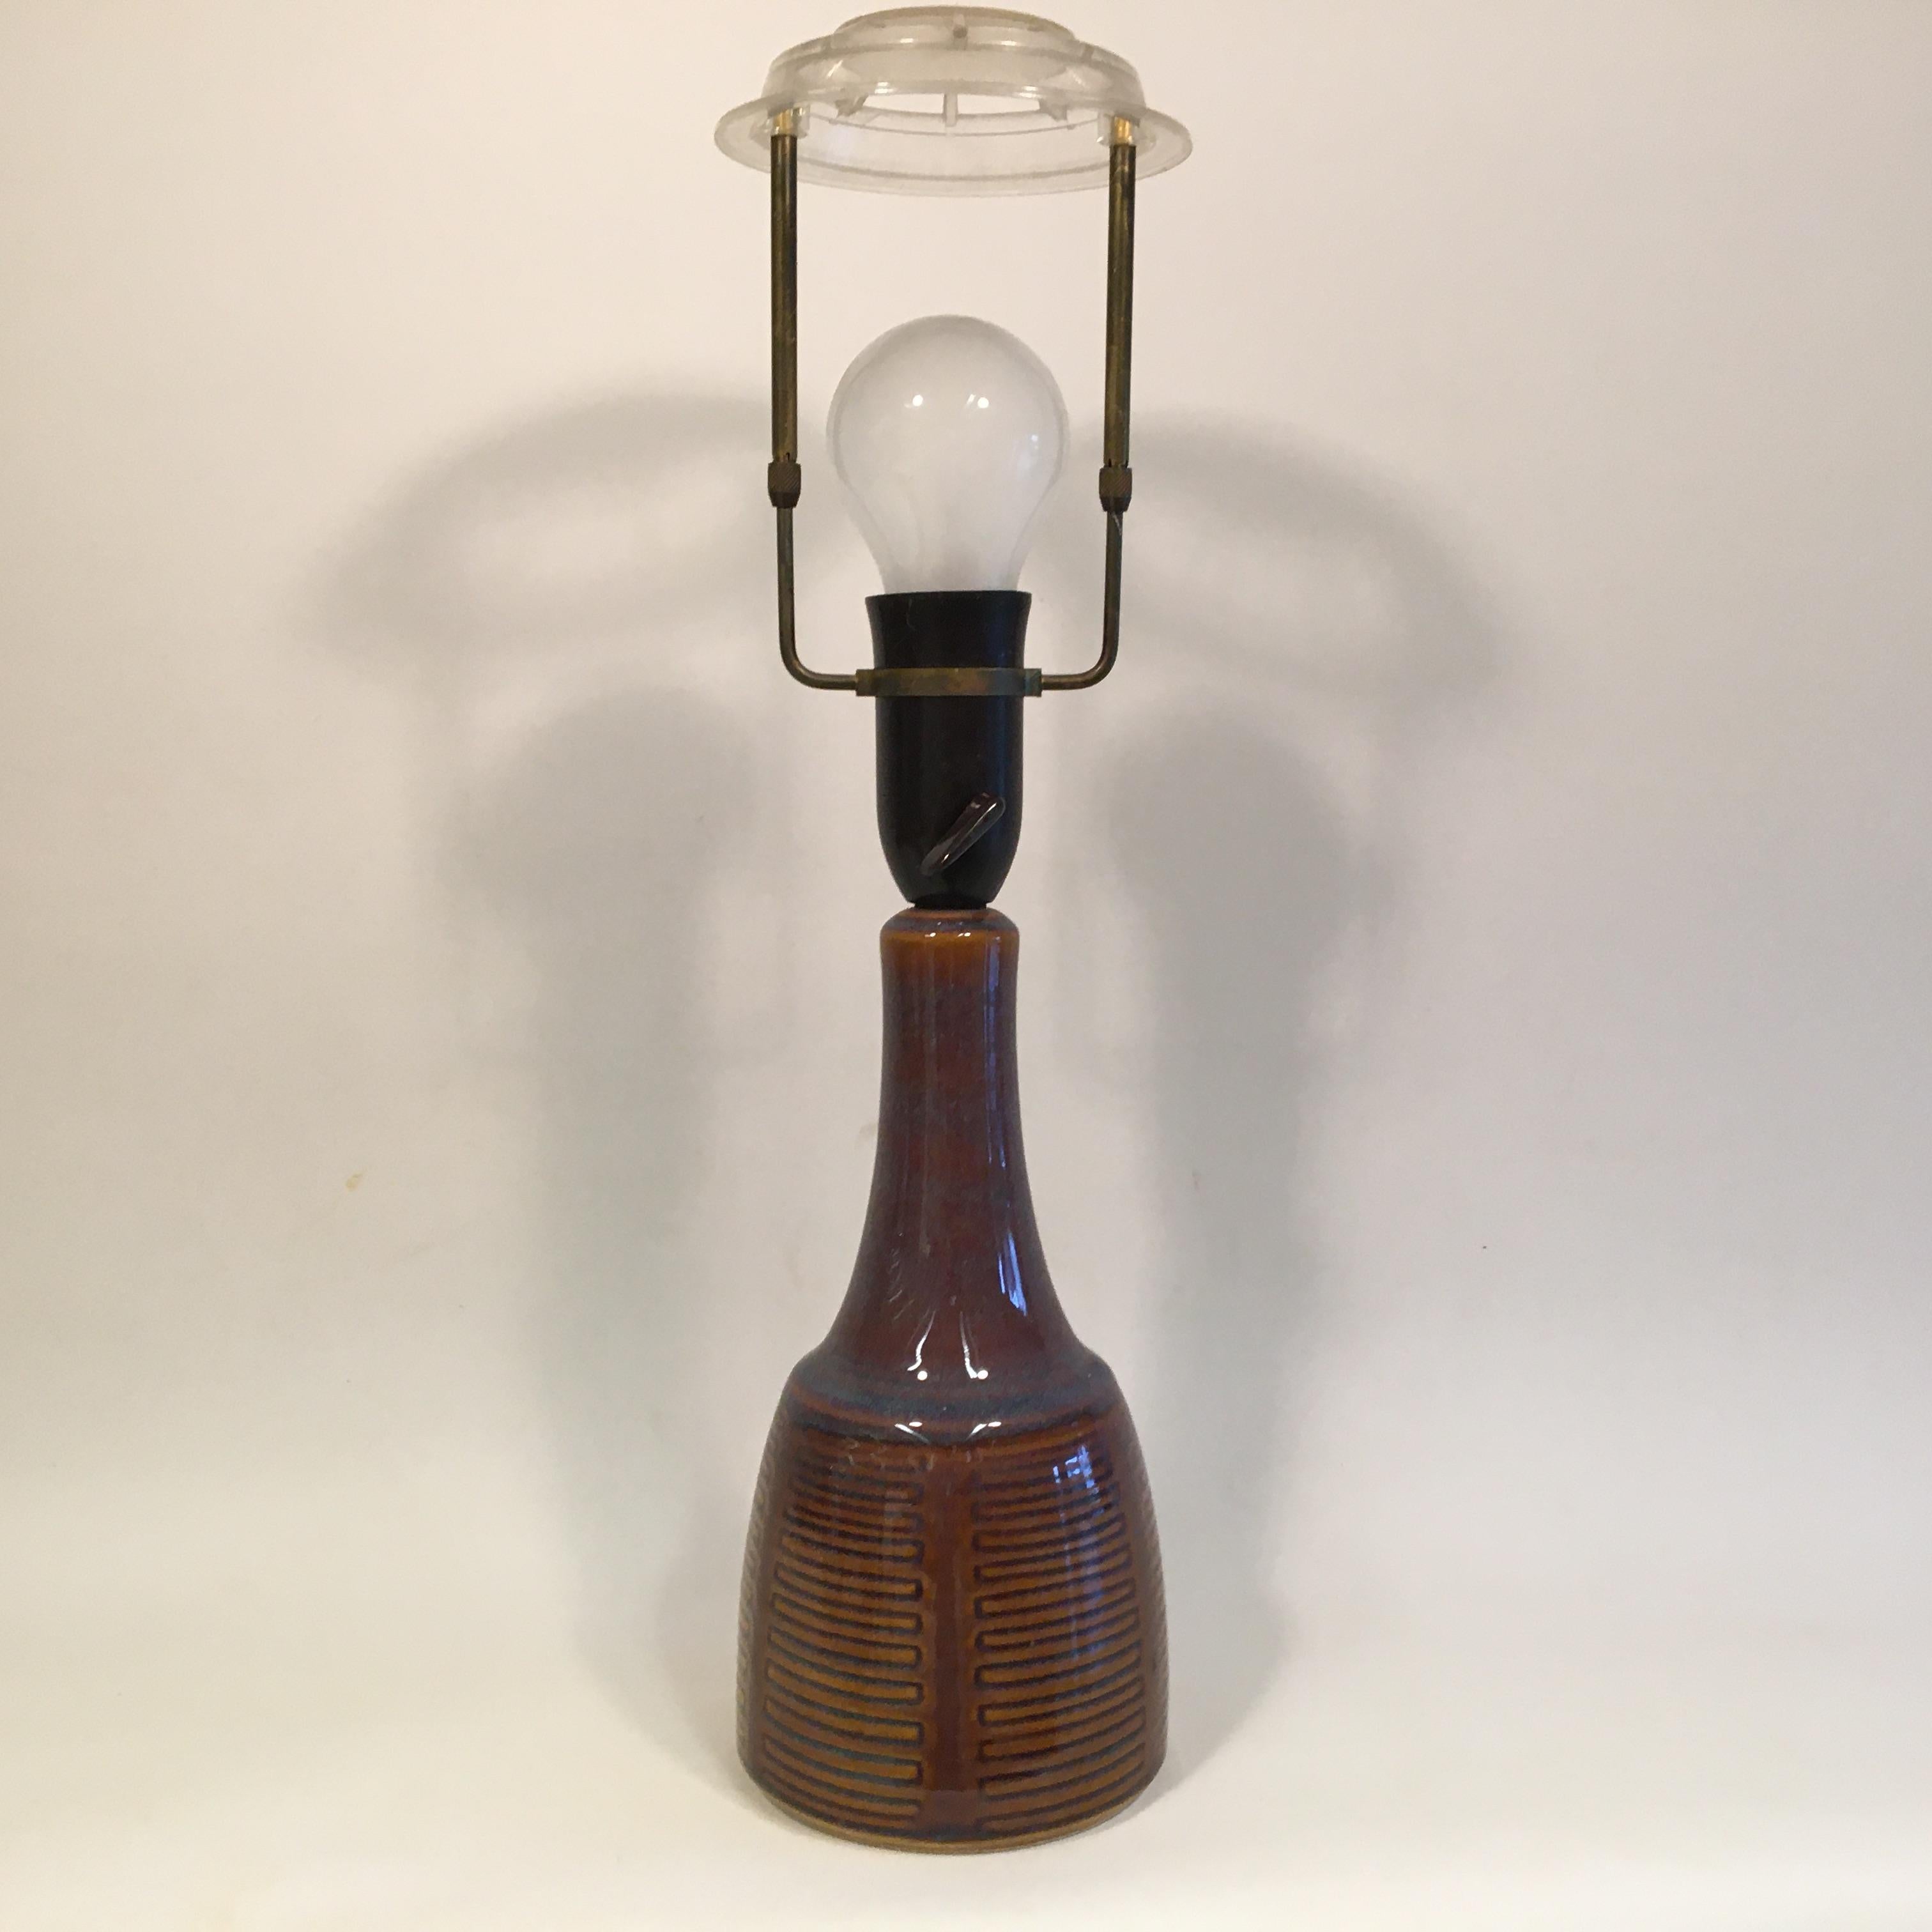 Søholm ceramic table lamp from Bornholm, with blue / brown shades in the glaze cross-streaked pattern on the lower part of the lamp. Marked. Cloos & Co. 1040th
Measures: Height 31 cm, Ø 11 cm.
The lamp is mounted with wire according to Danish